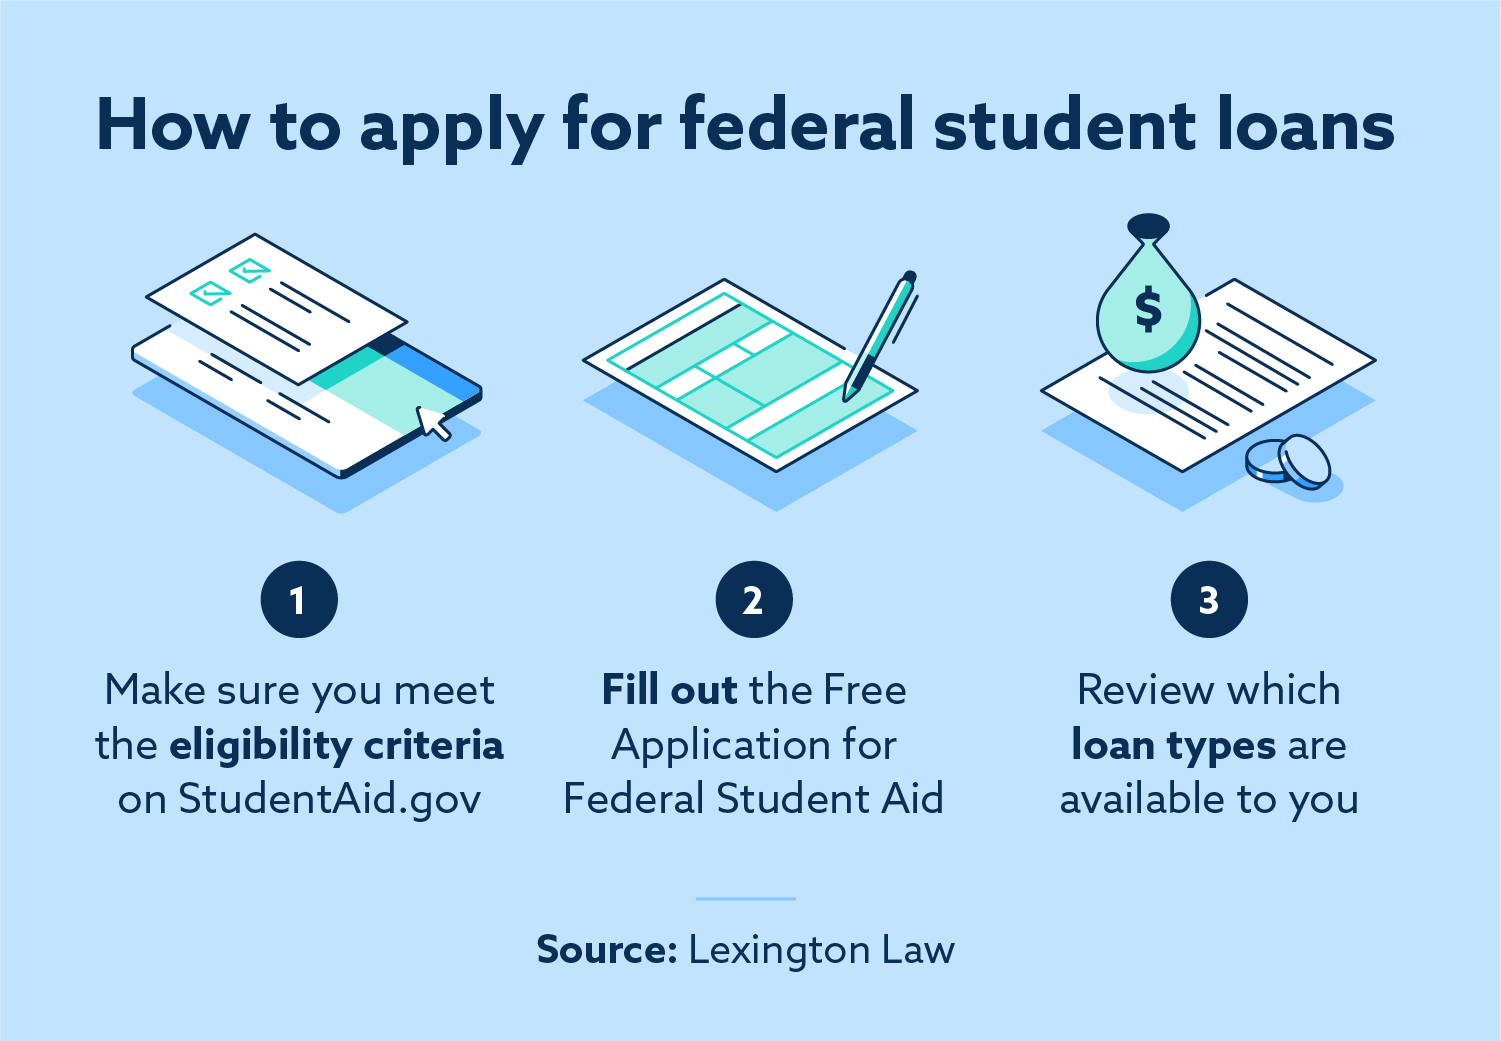 How to apply for federal student loans